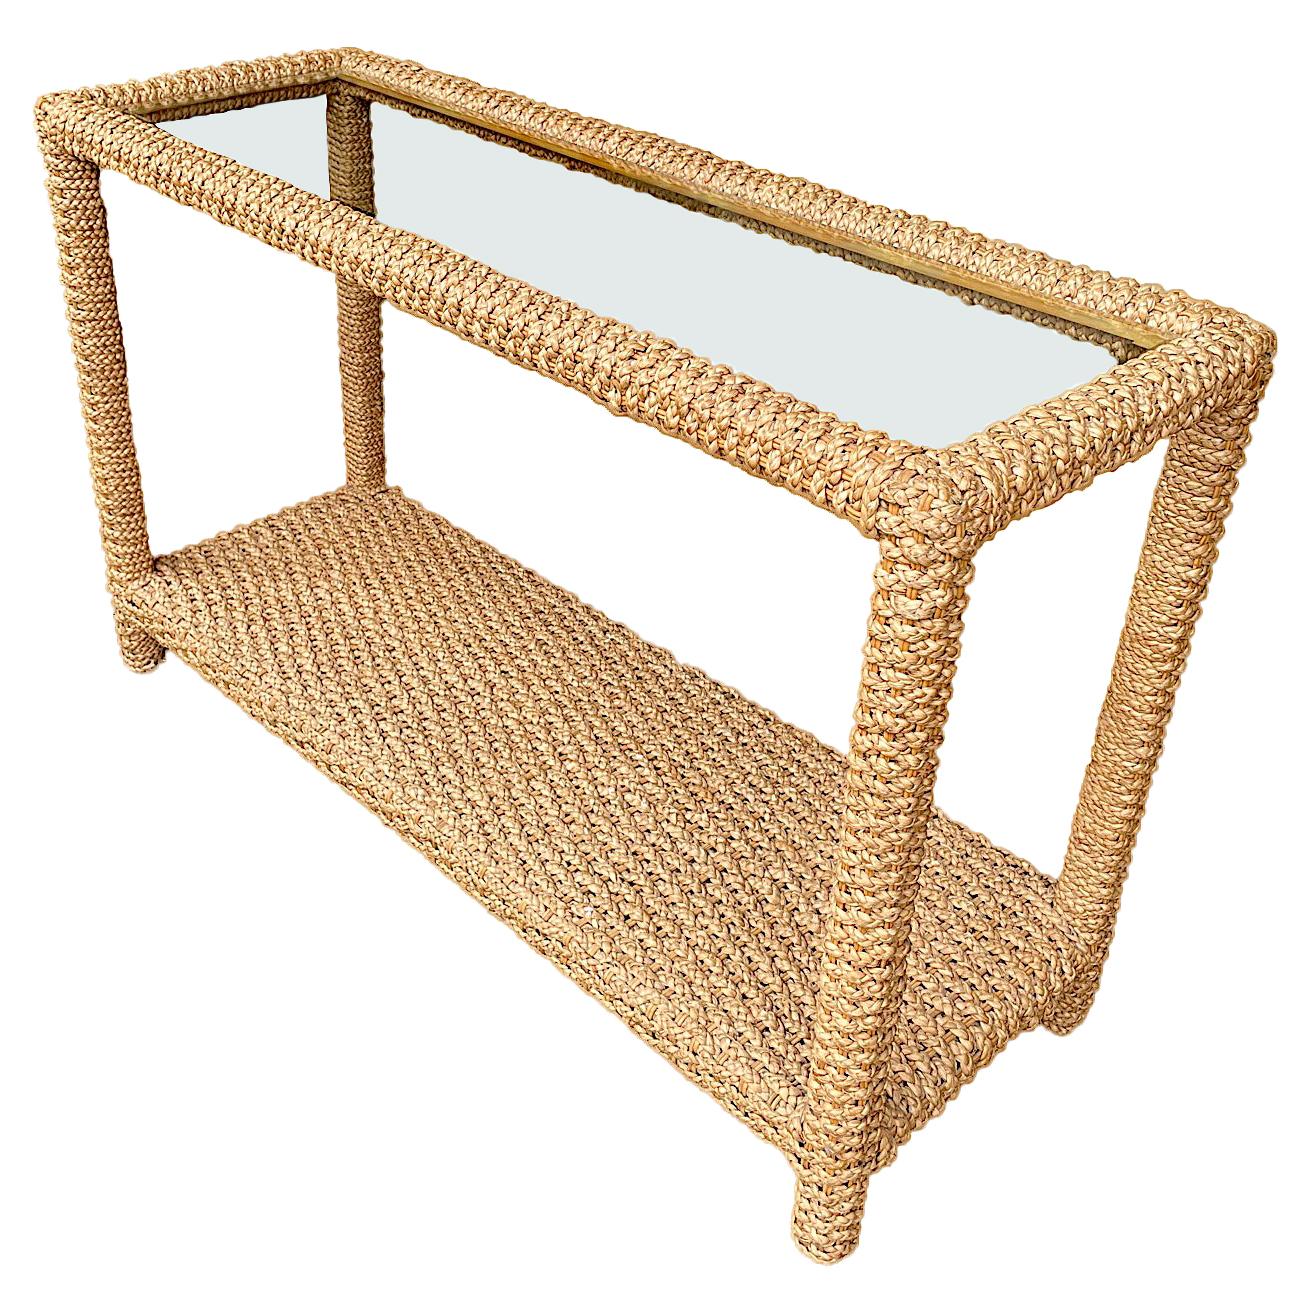 Stunning 1950s Rope Console by Adrian Audoux and Frida Minet with Glass Shelf